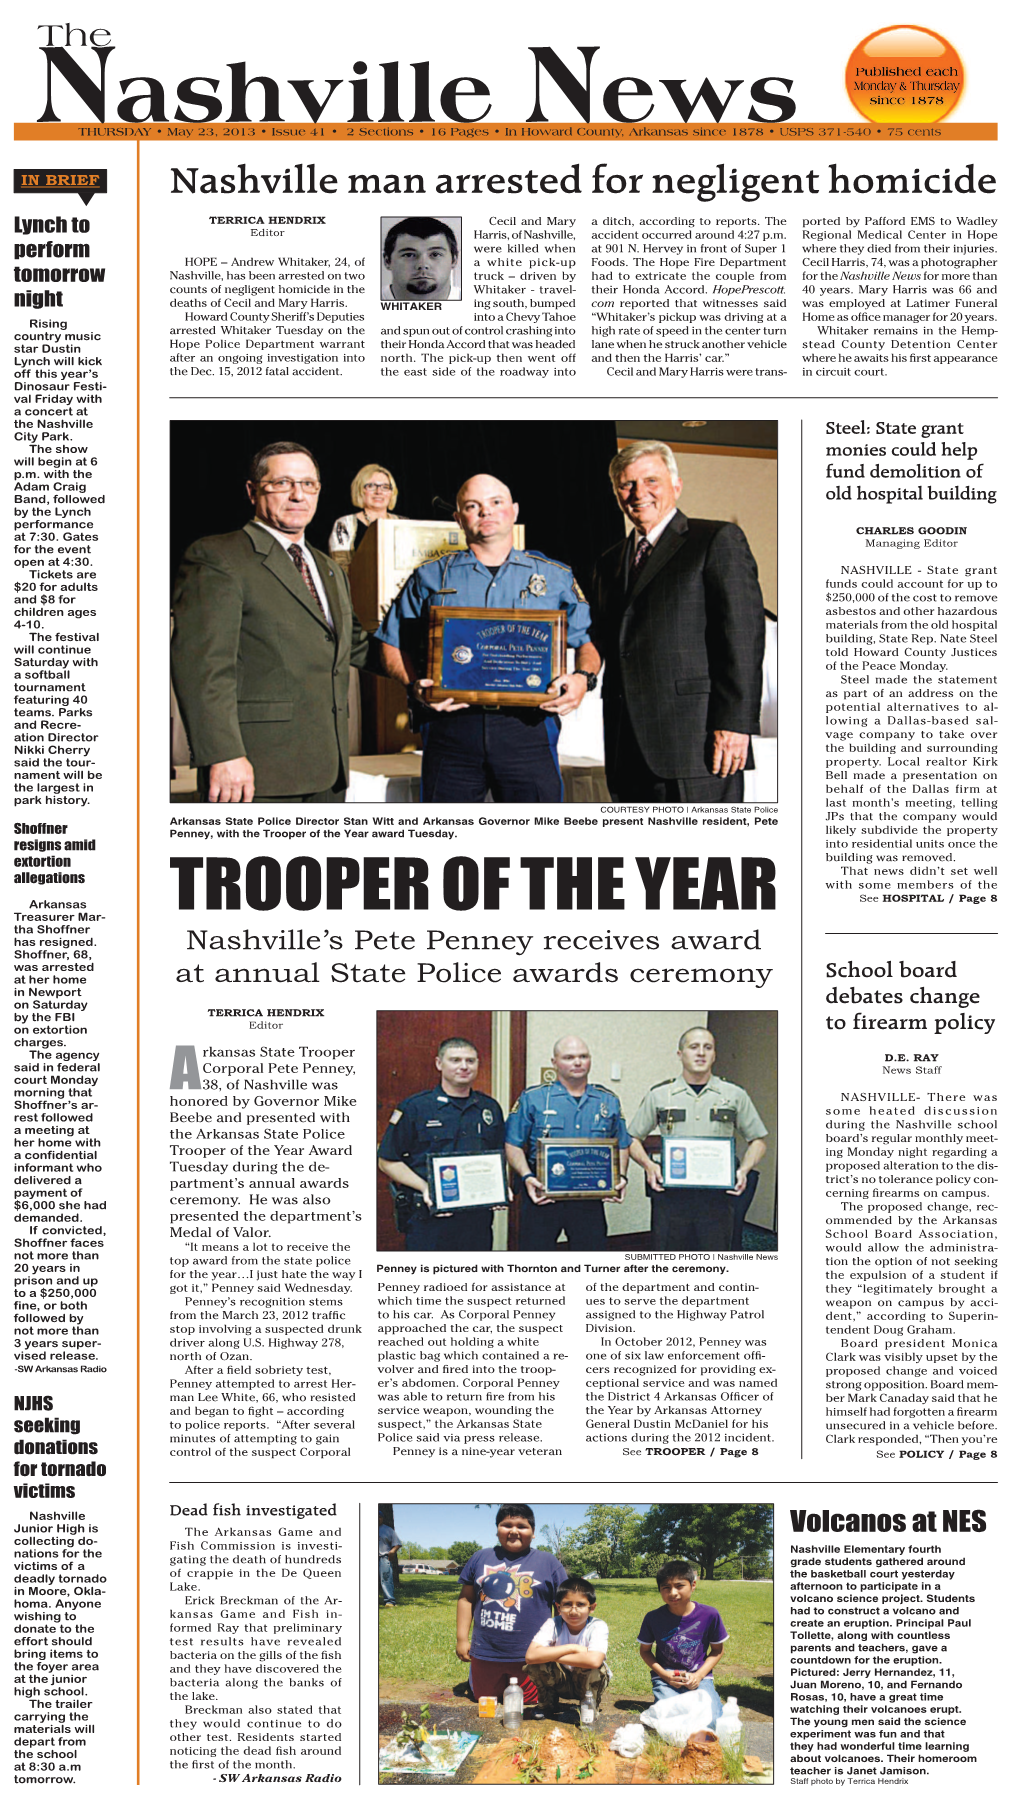 Trooper of the Year Award Tuesday